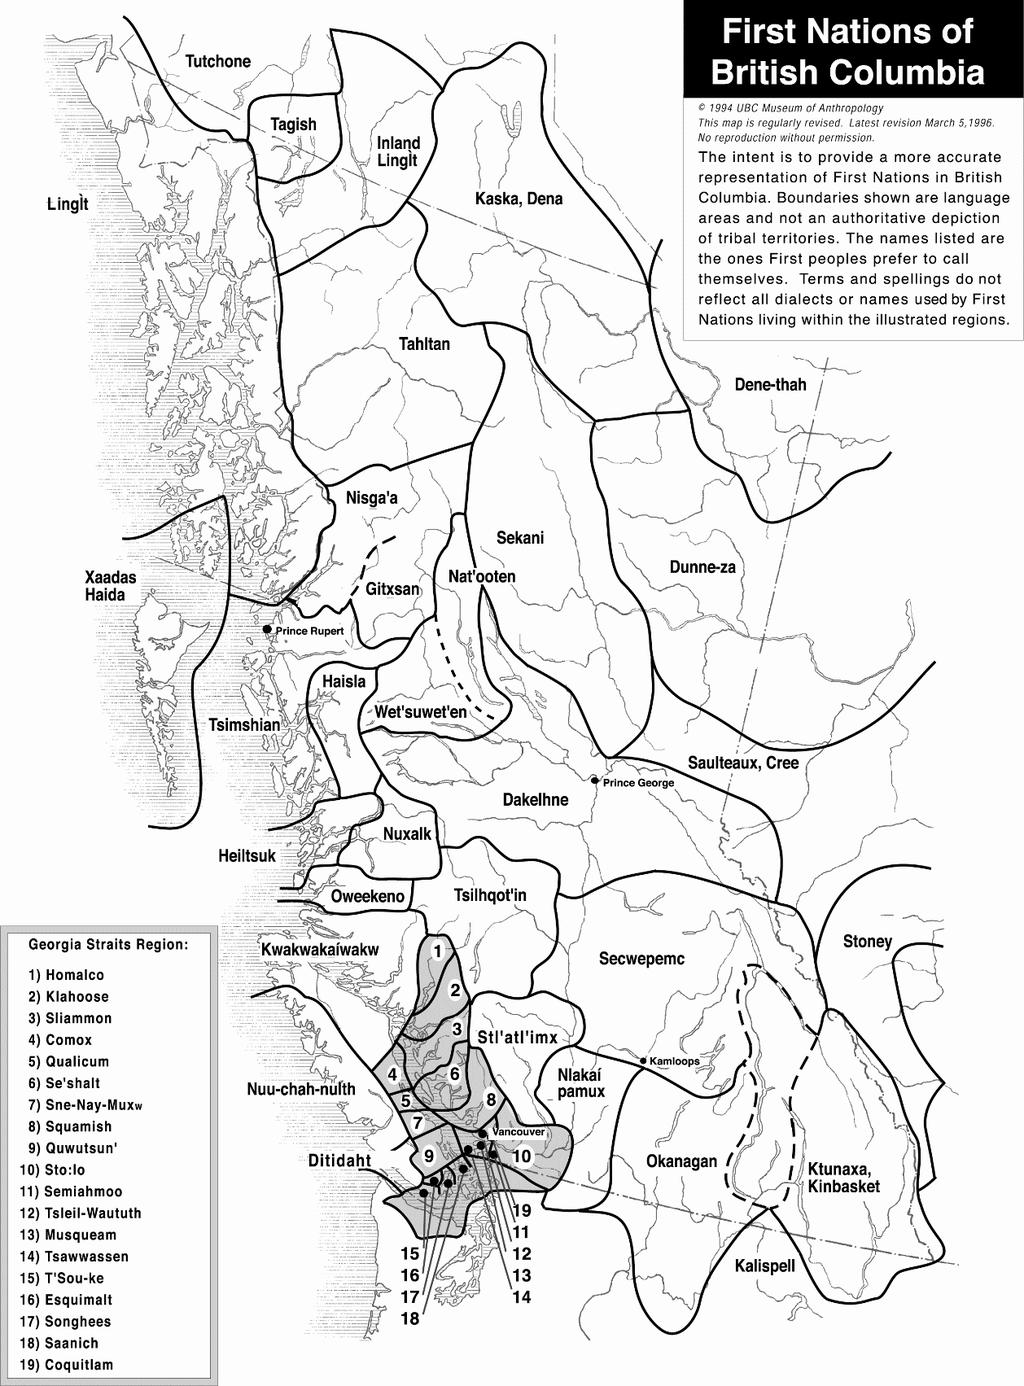 Fig. 2.1 First Nations of British Columbia.